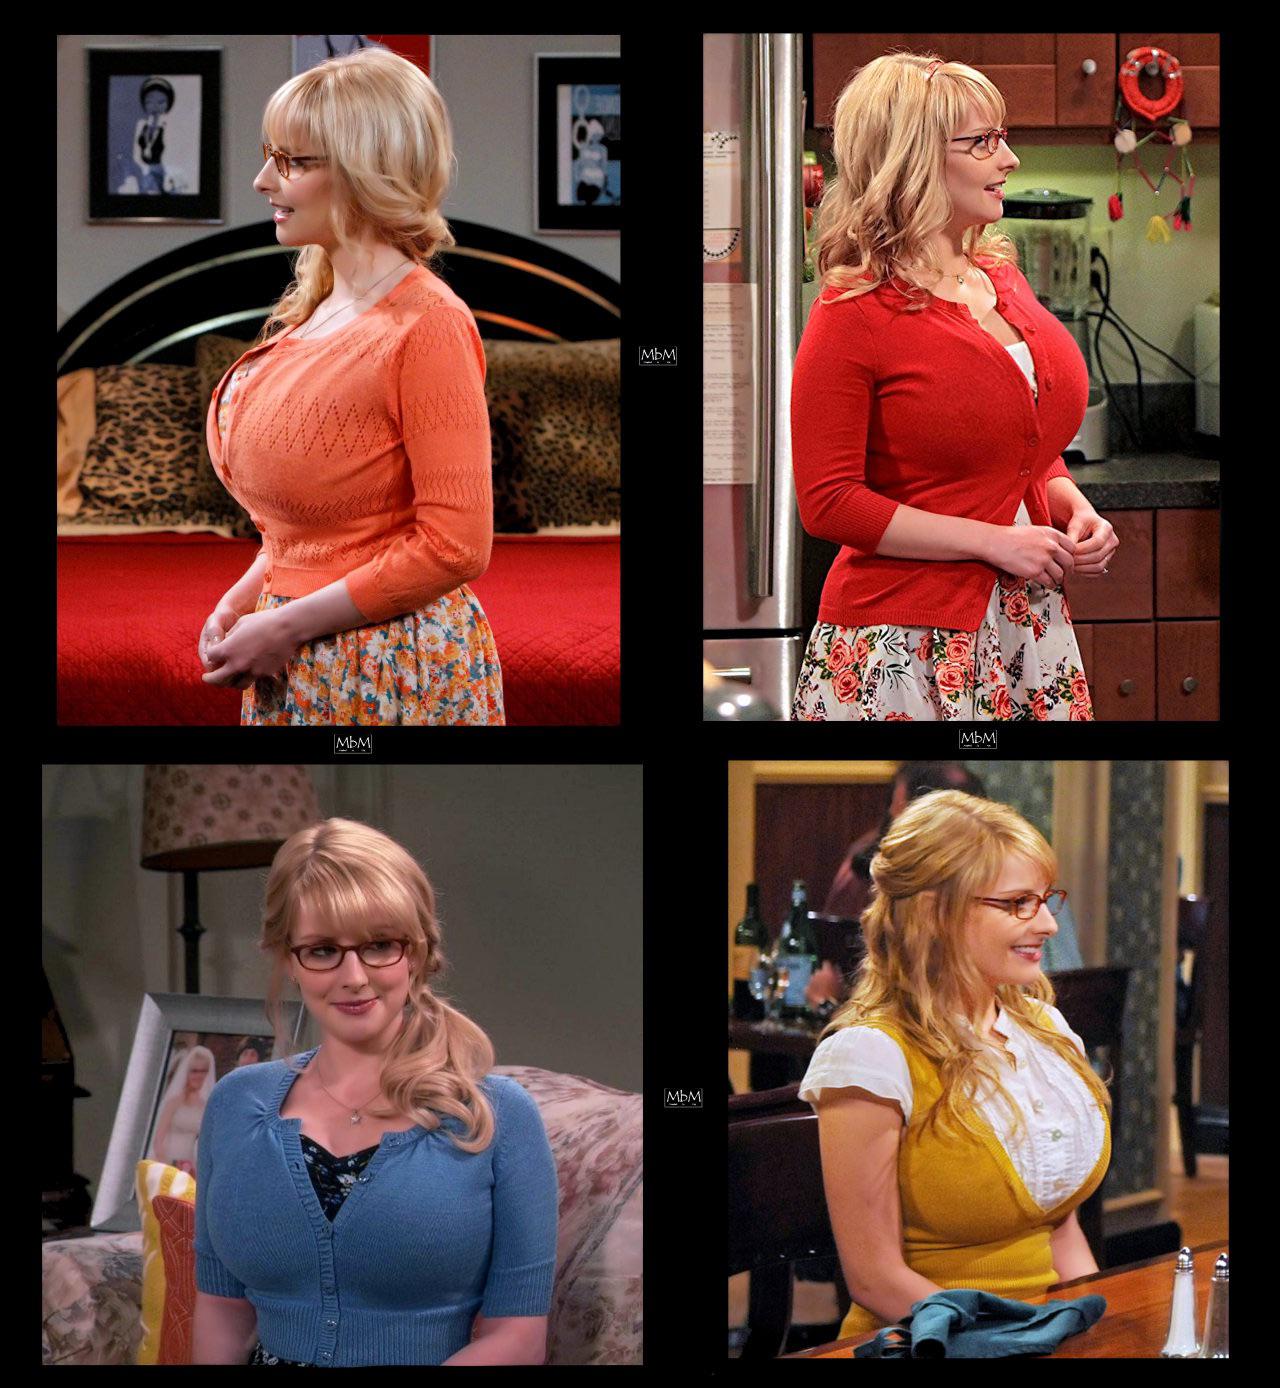 Let’s just say Melissa Rauch knows how to fill out cardigans...